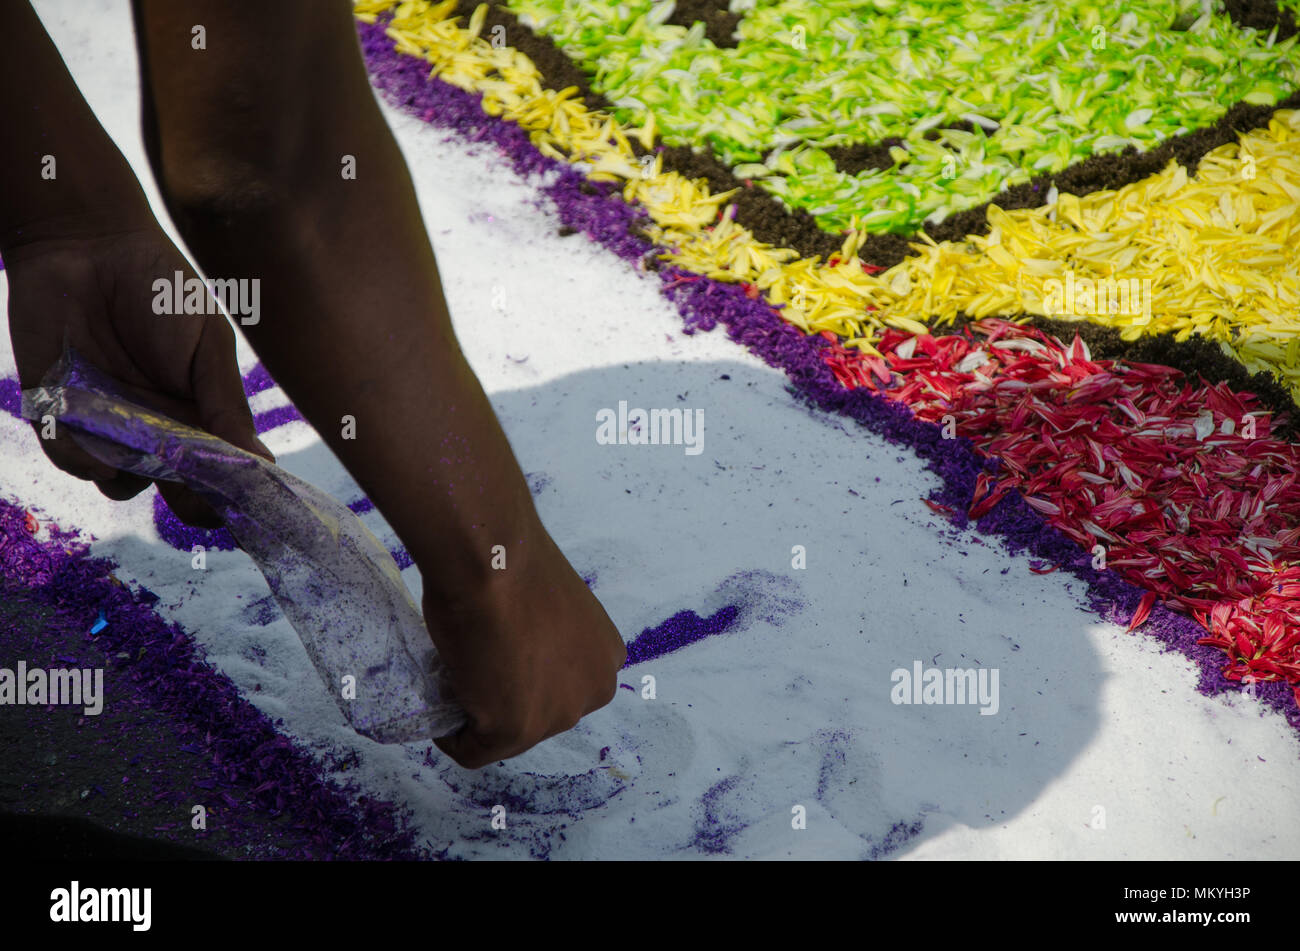 Preparation of floral carpets in the Holy Week or Easter Week Stock Photo